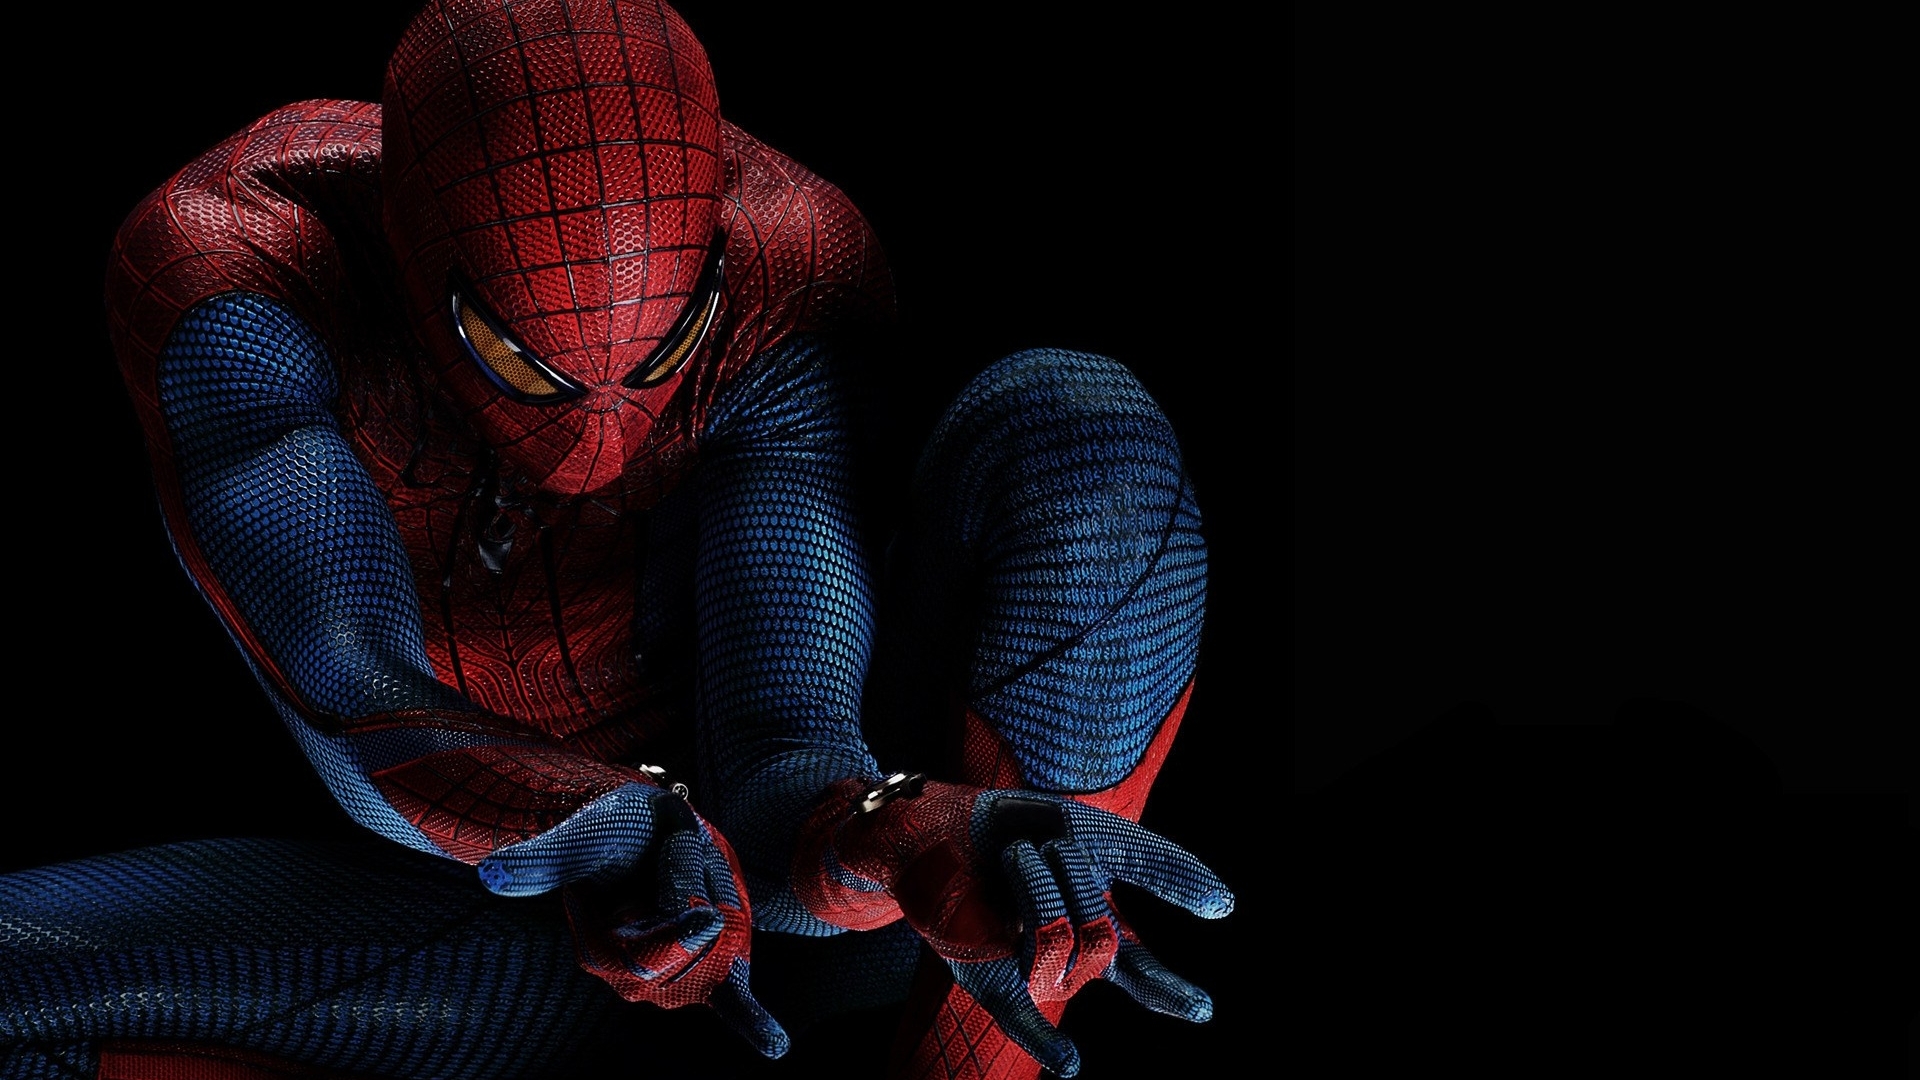 40672 Screensavers and Wallpapers Spider Man for phone. Download cinema, spider man, black pictures for free